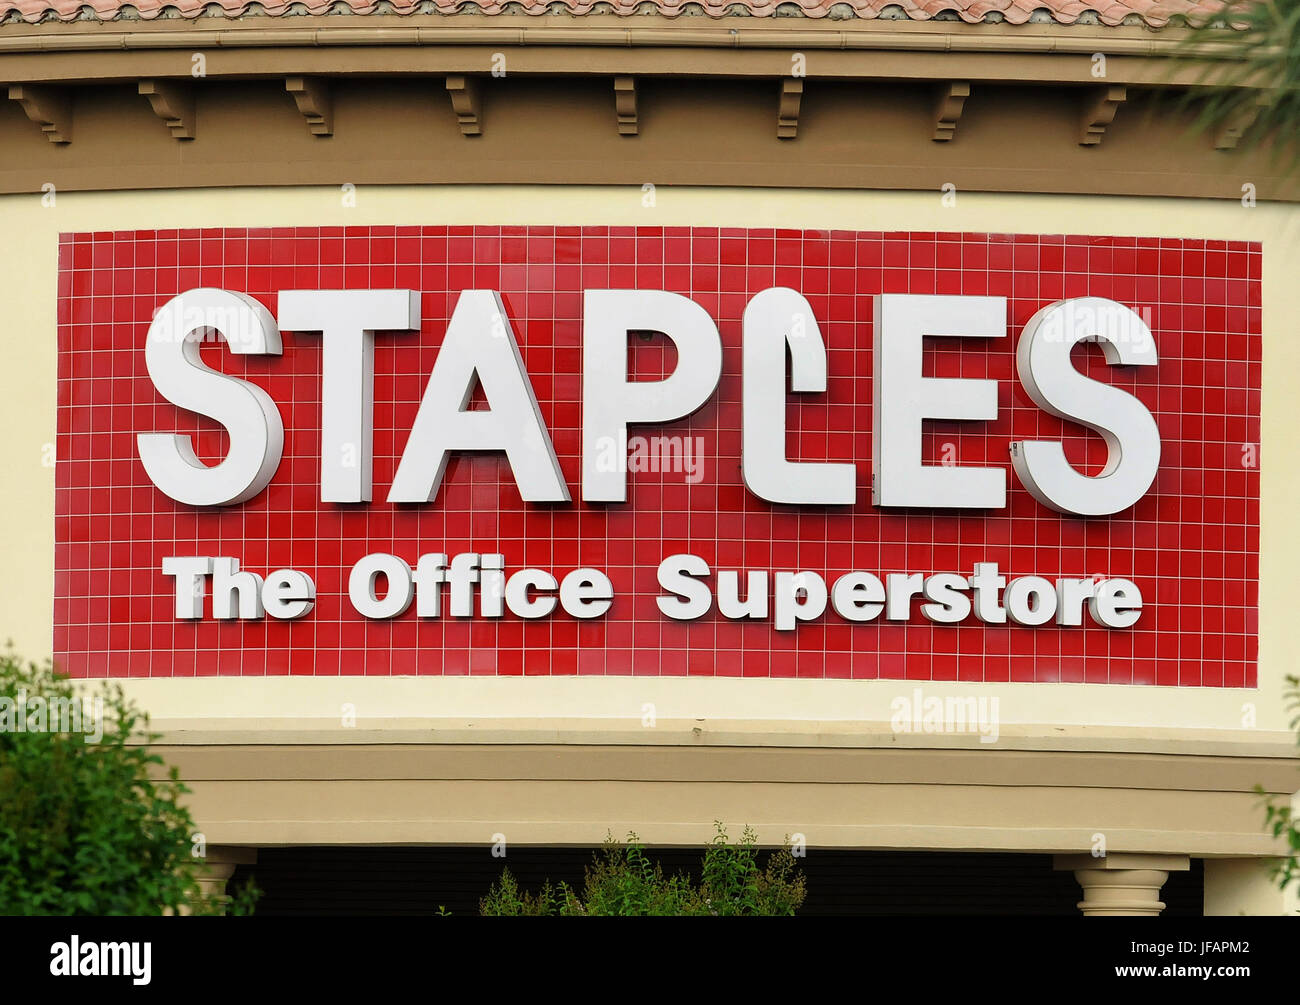 Staples office superstore sign. An American multinational office